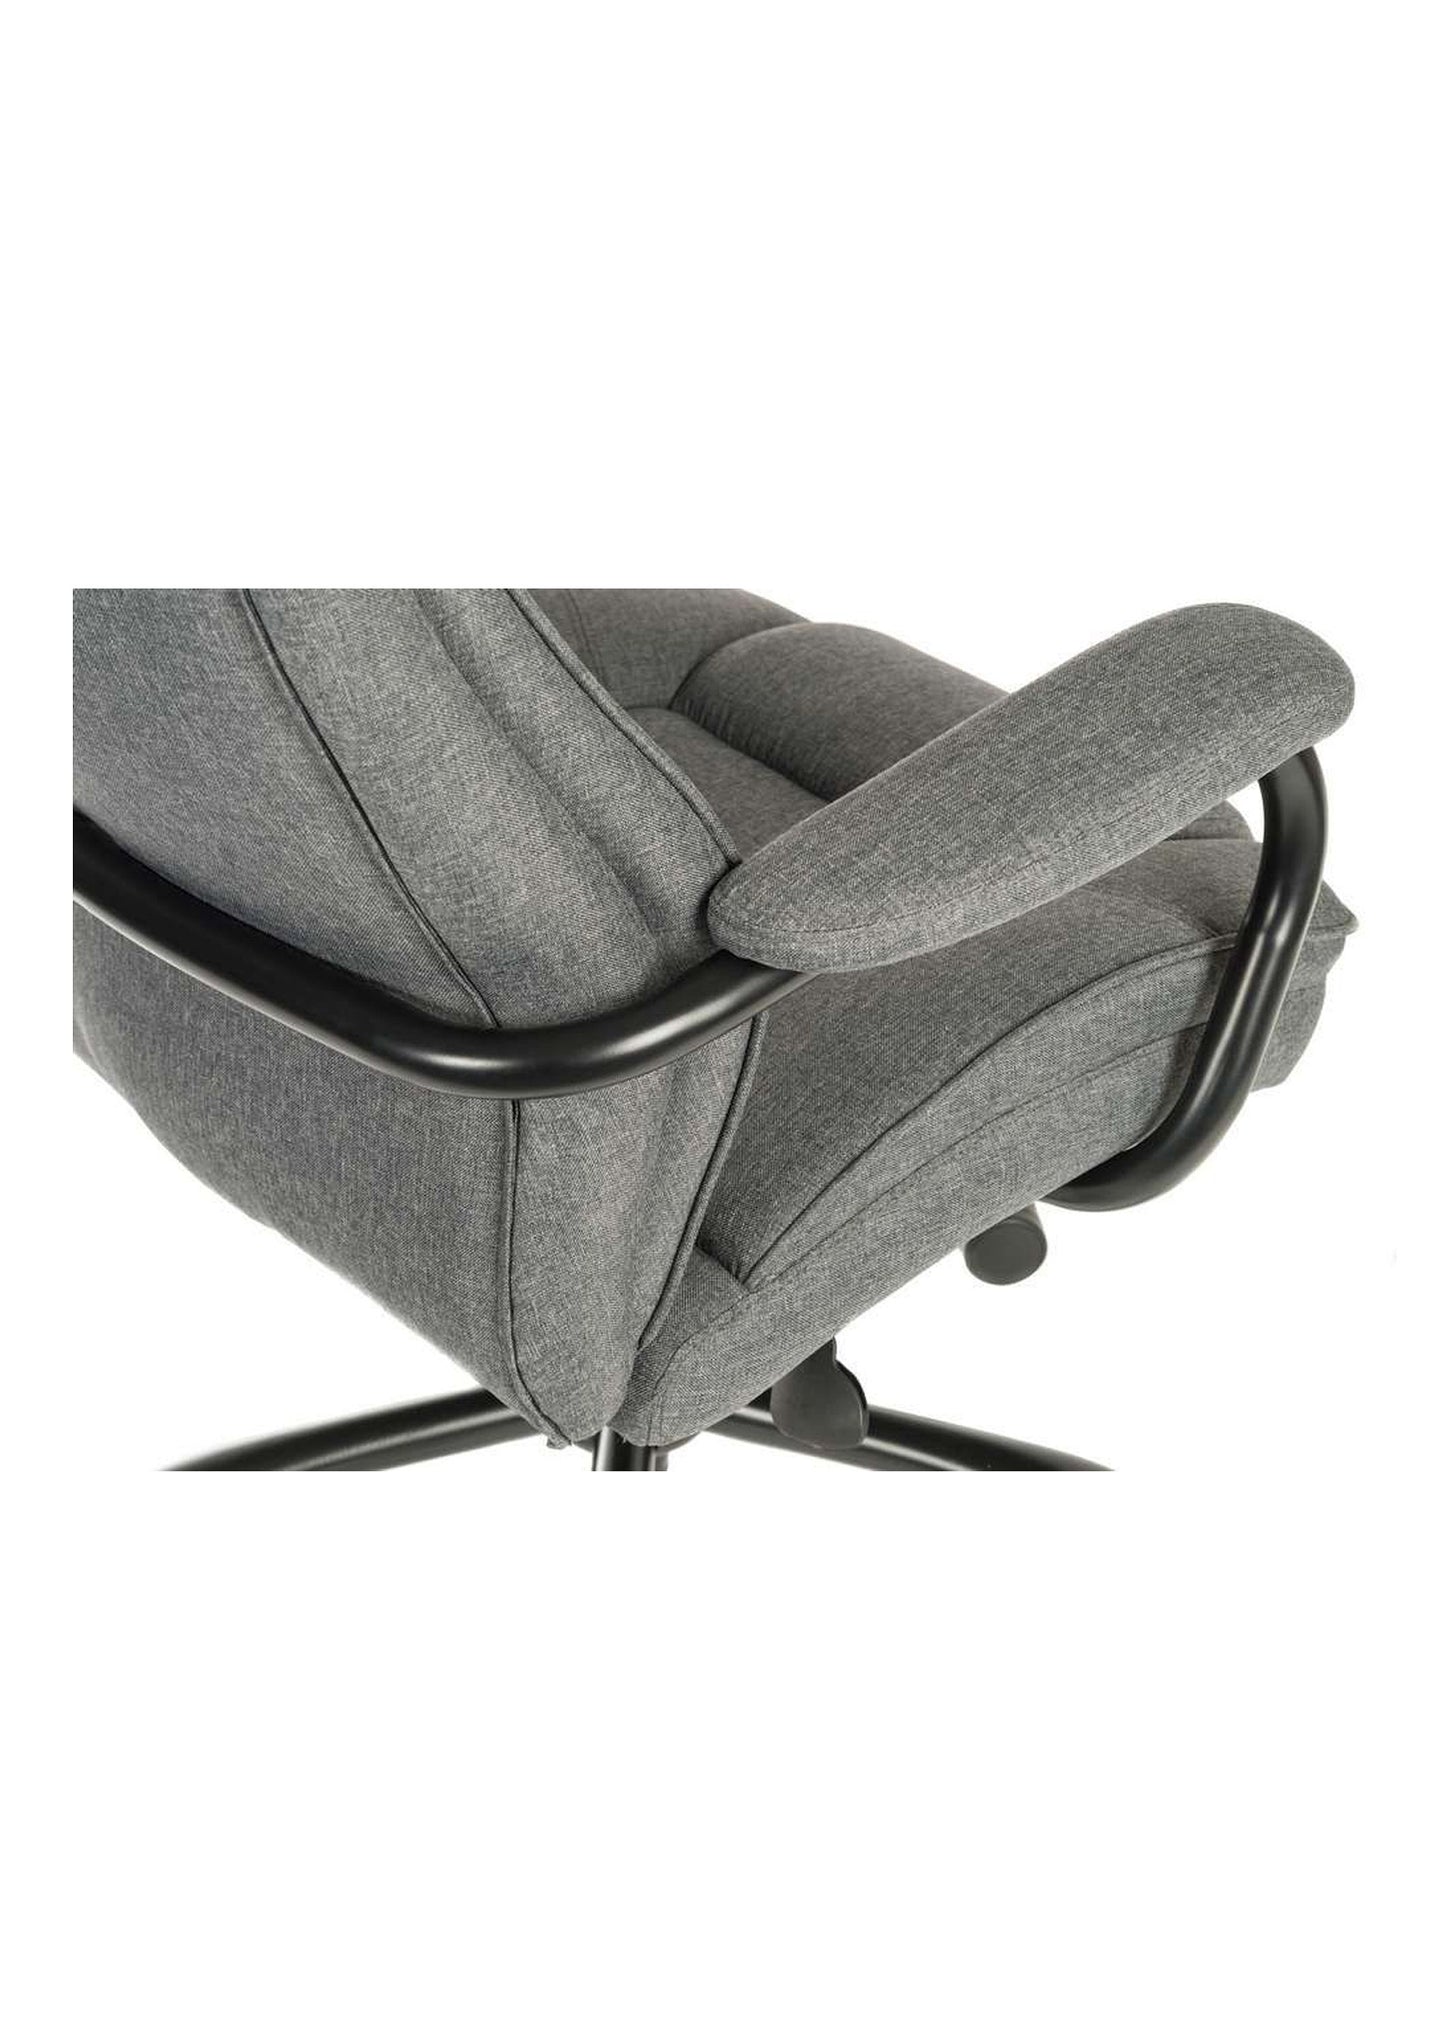 NEW Designer Executive adjustable swivel office/desk chair grey fabric Reclining function with tilt tension